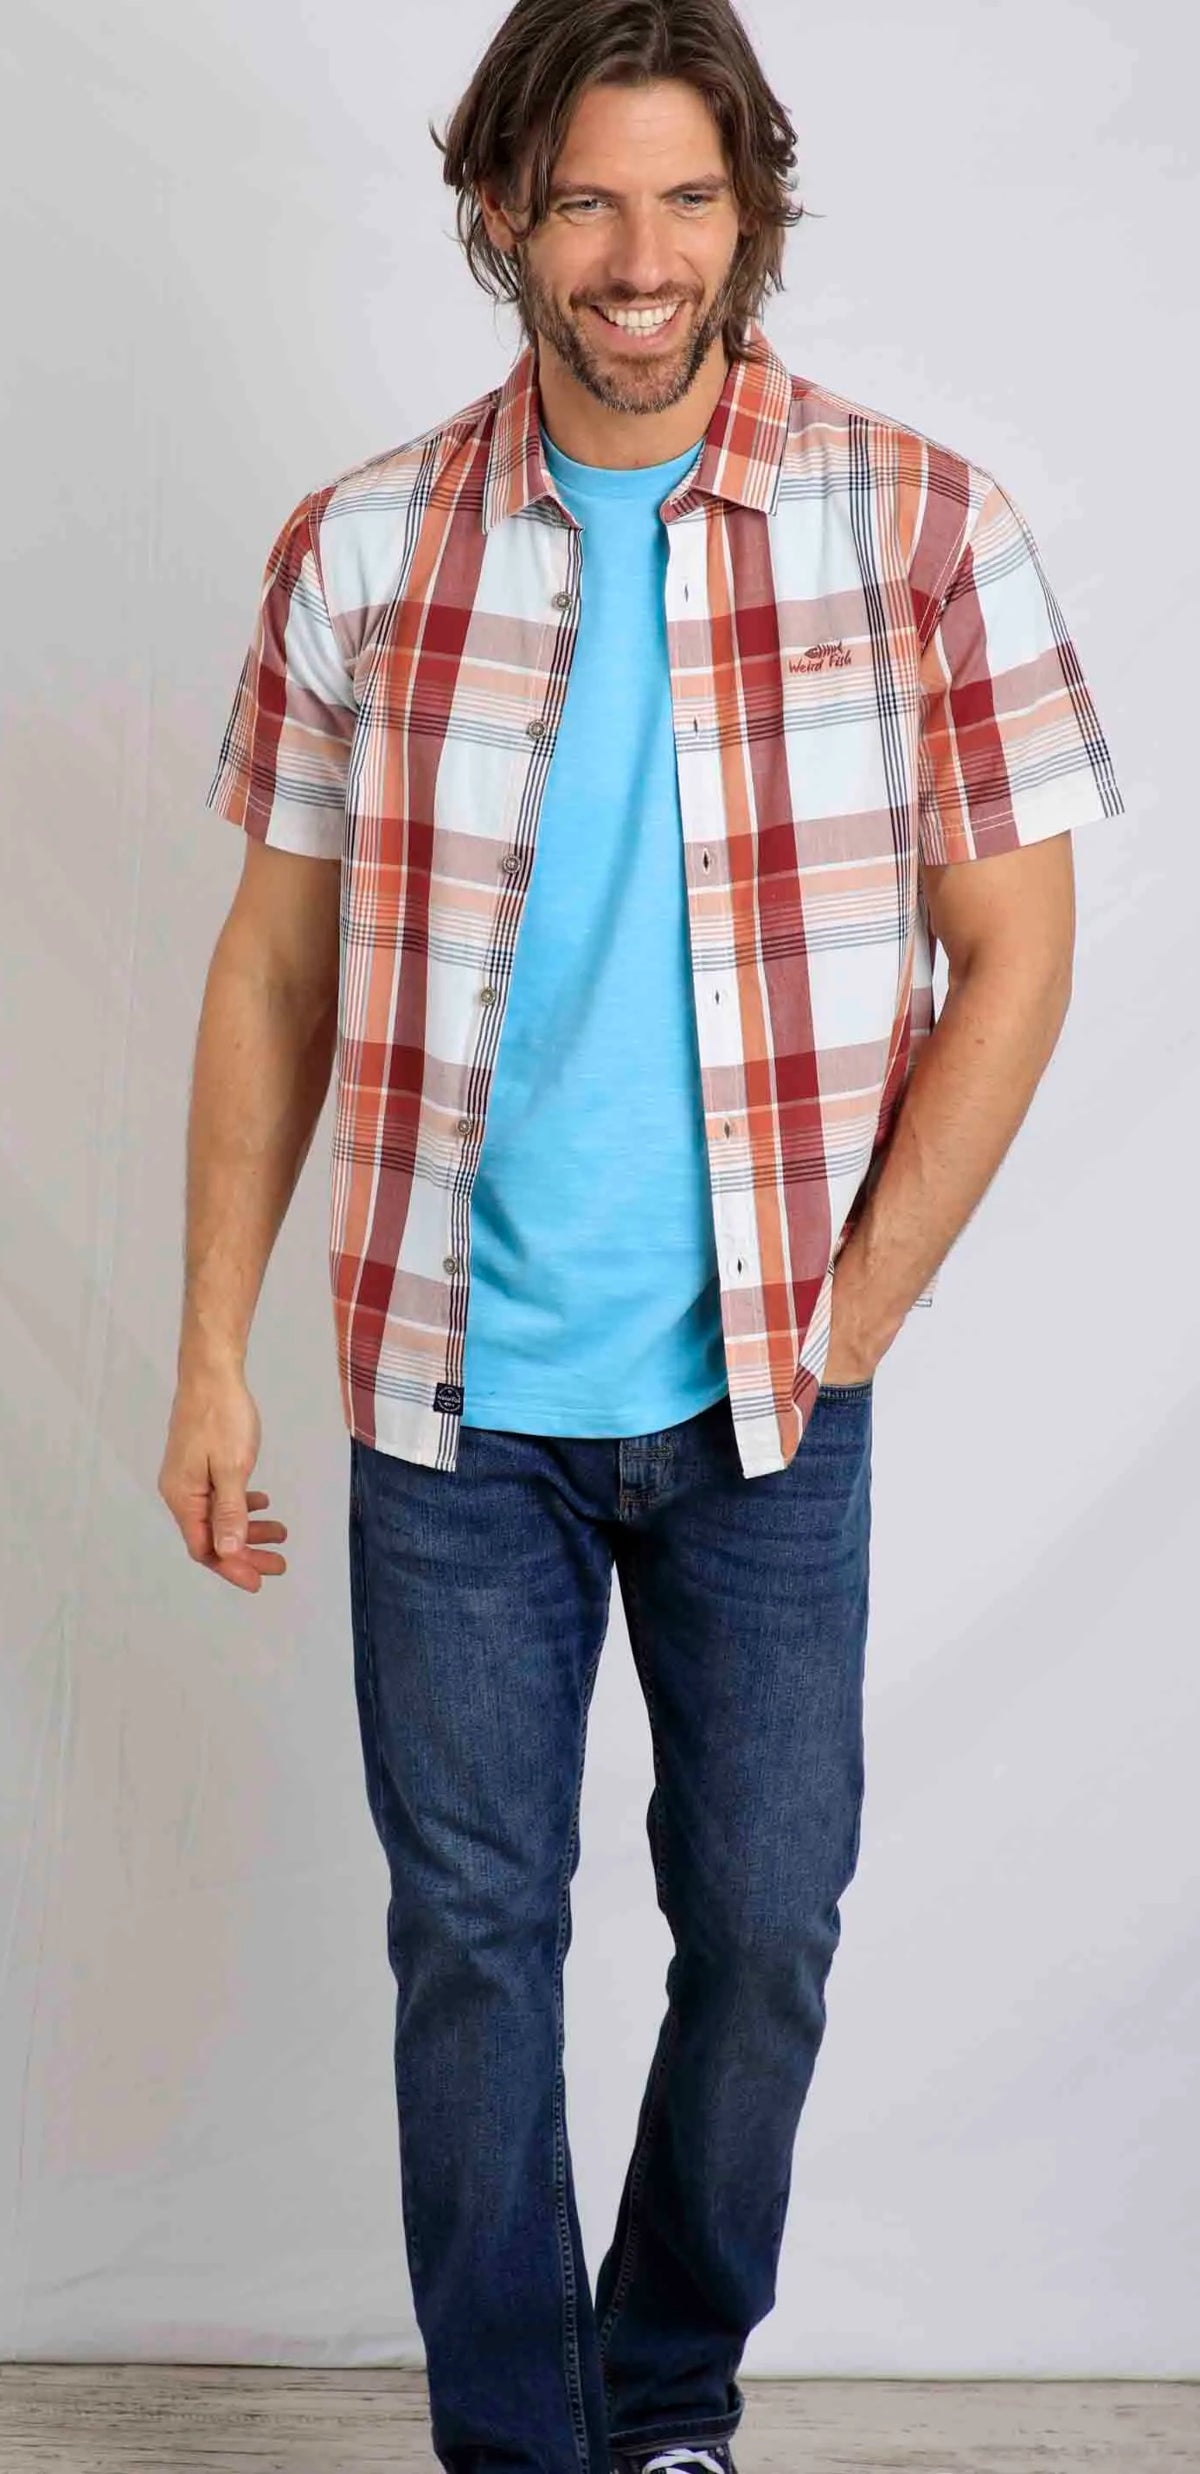 Men's short sleeve Judd check shirt from Weird Fish with button down front in Chilli Red.